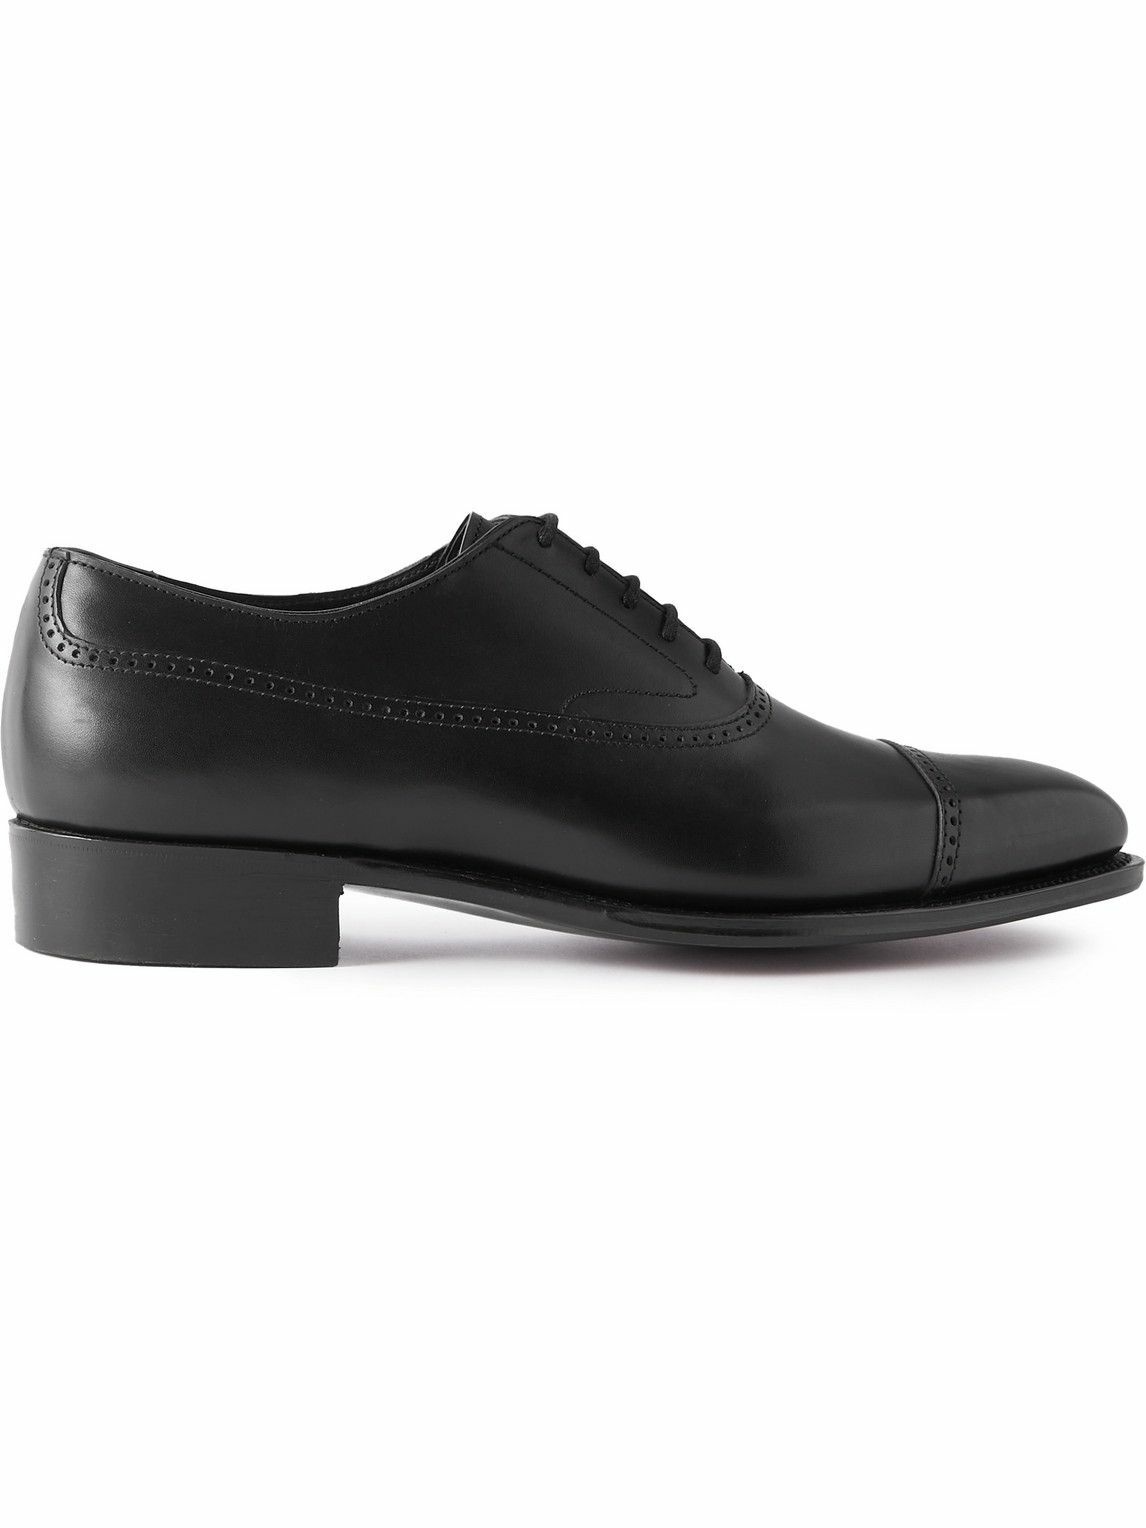 Photo: George Cleverley - Charles Leather Oxford Shoes - Black